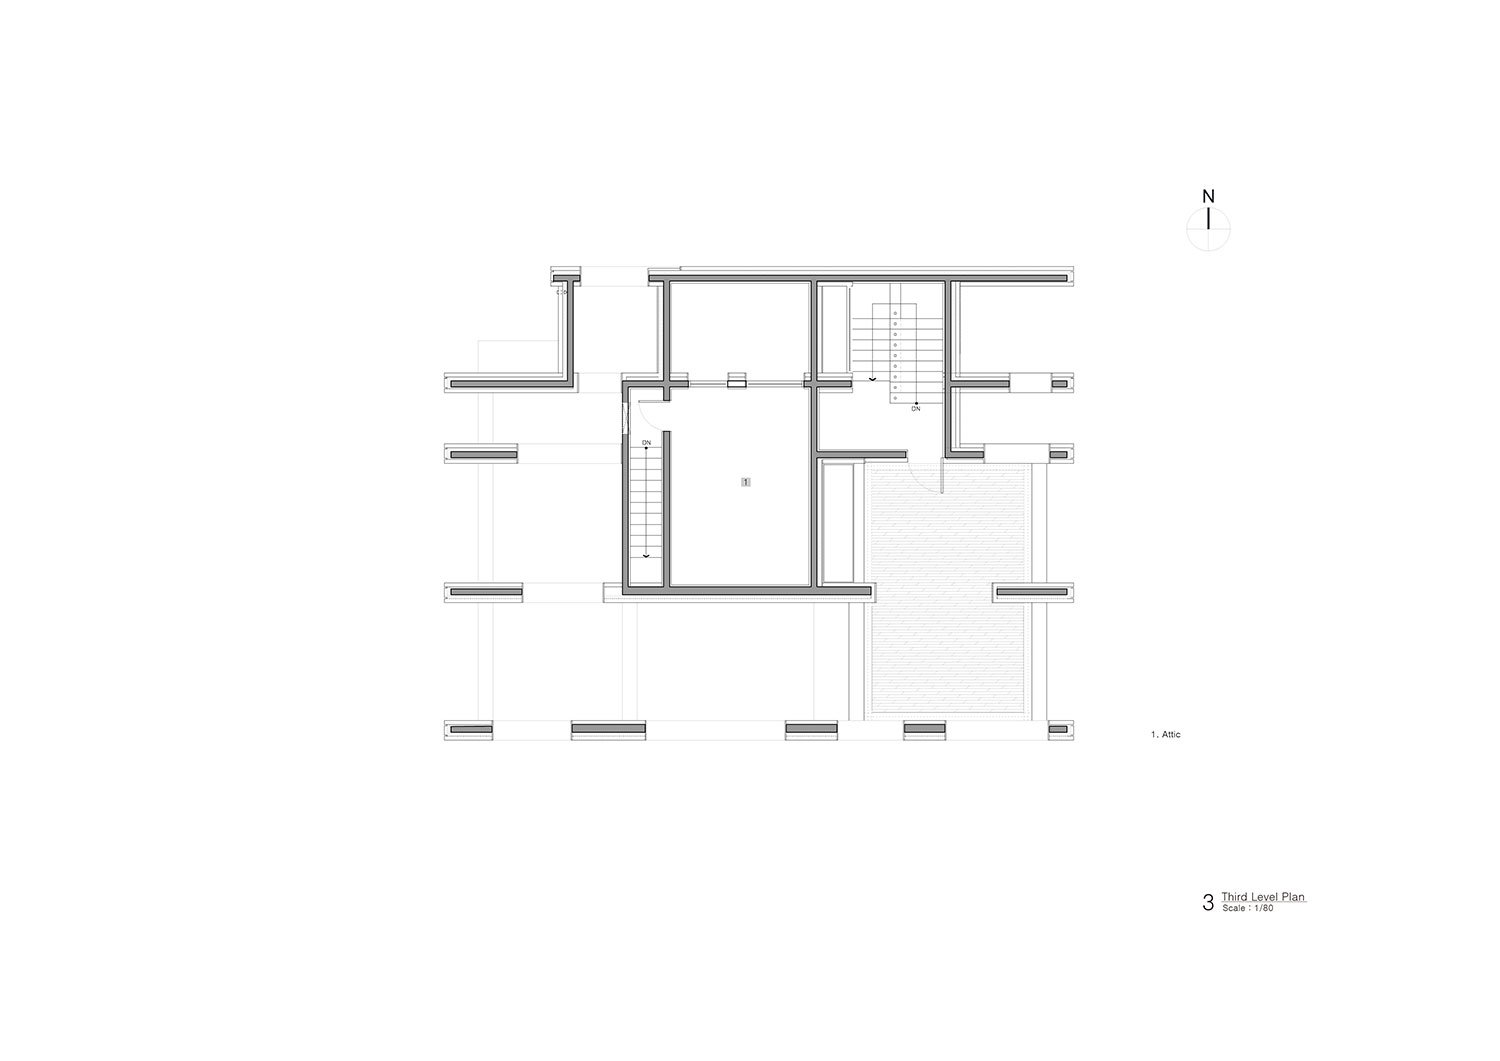 Roof Floor Plan | Unsangdong Architects Co., Ltd.